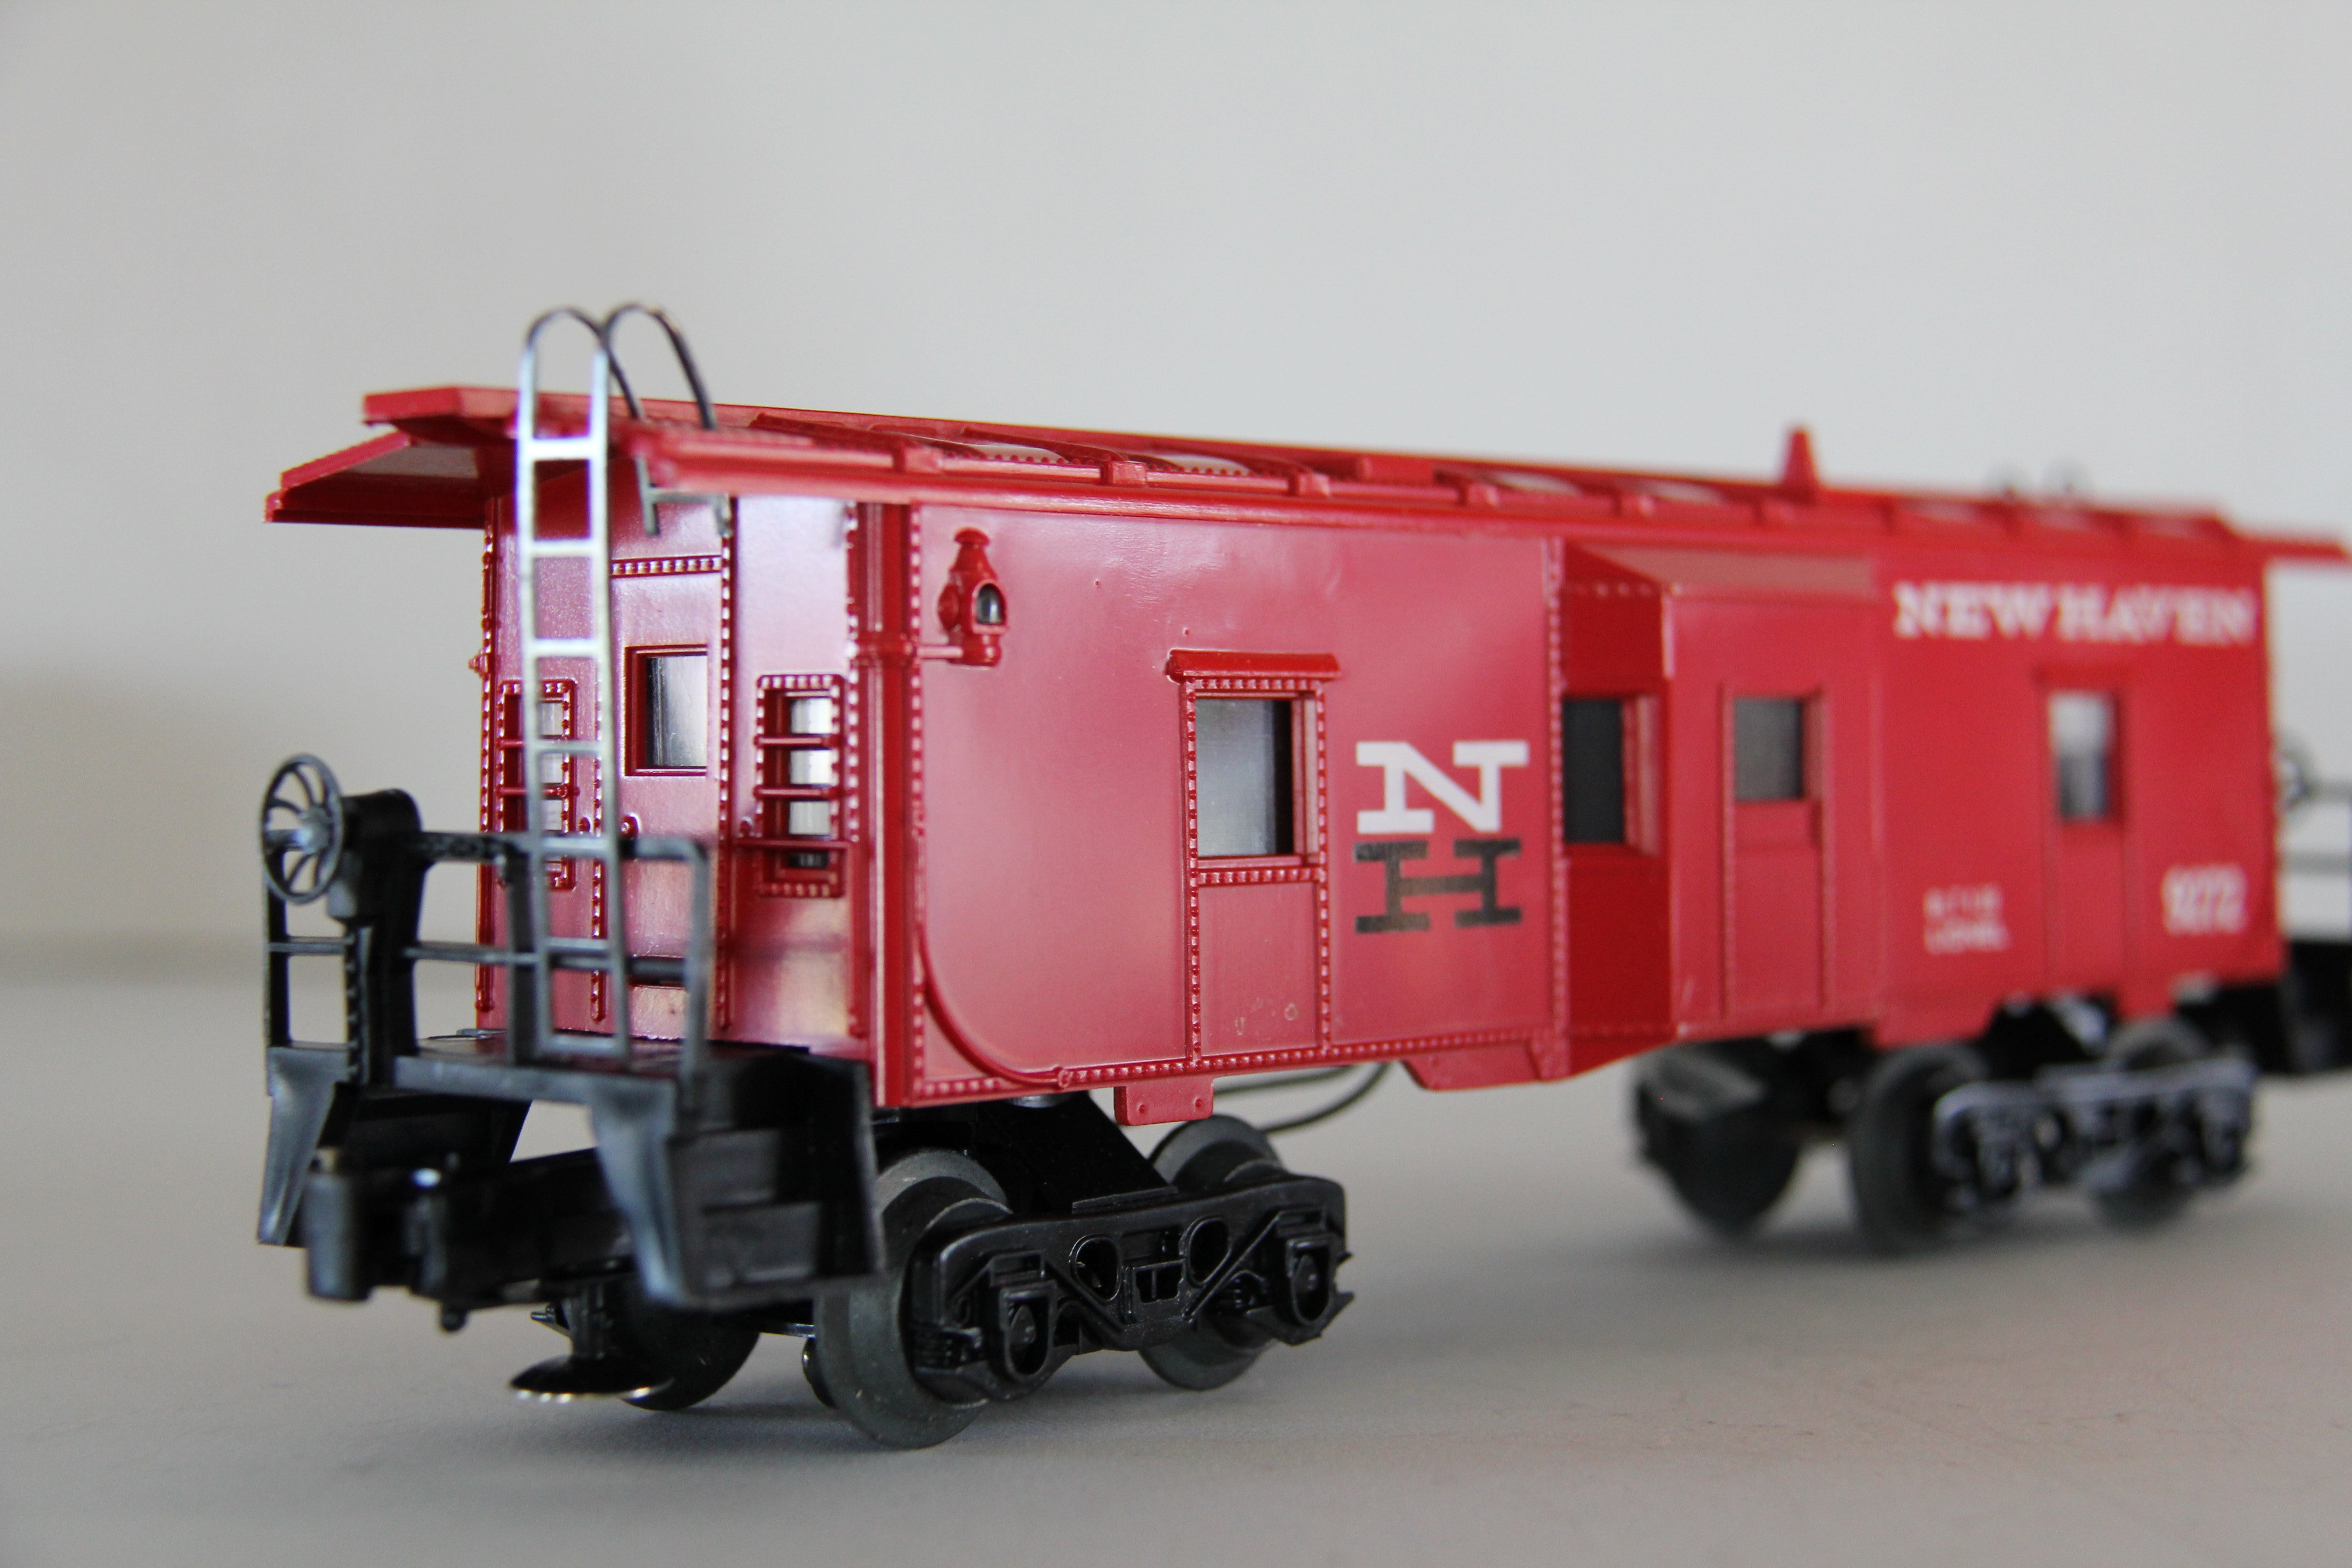 Lionel 6-9272 New Haven Bay Window Caboose-Second hand-M3468